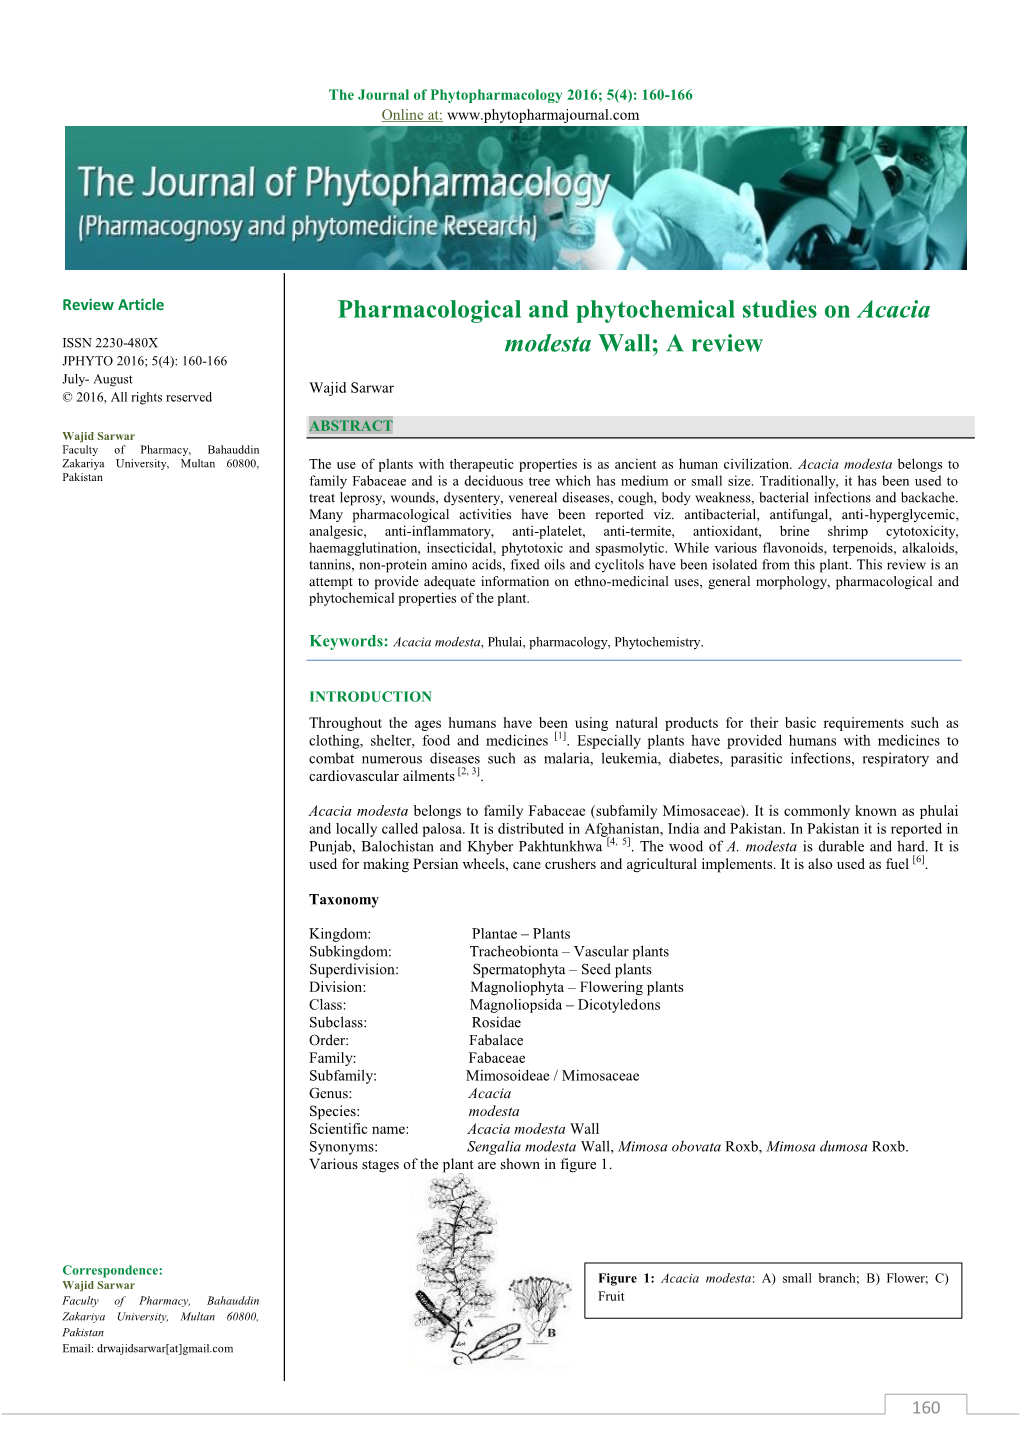 Pharmacological and Phytochemical